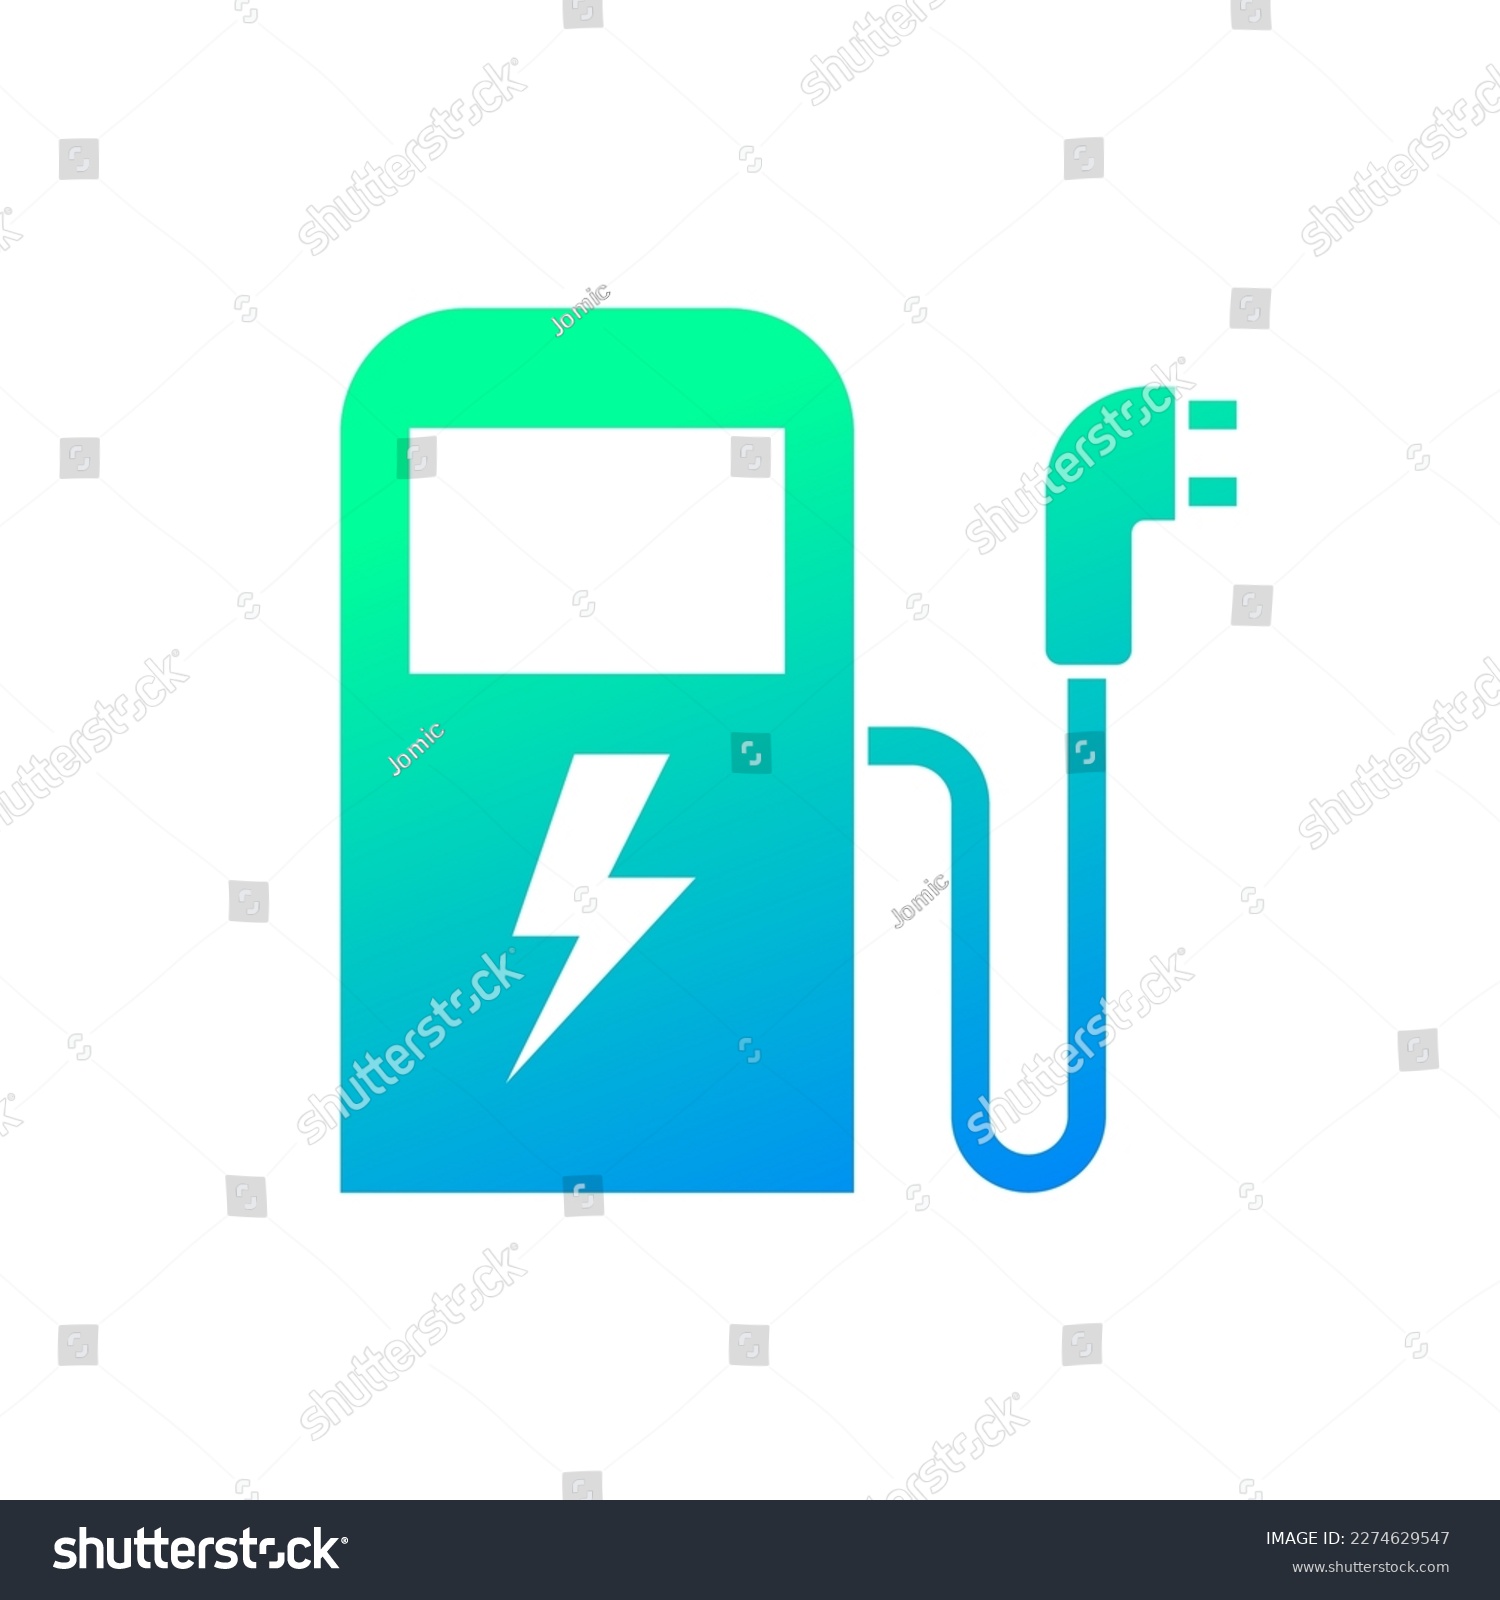 SVG of Green eco electric fuel pump icon, Charging point station for hybrid, Linear design, Isolated on white background, Vector illustration svg